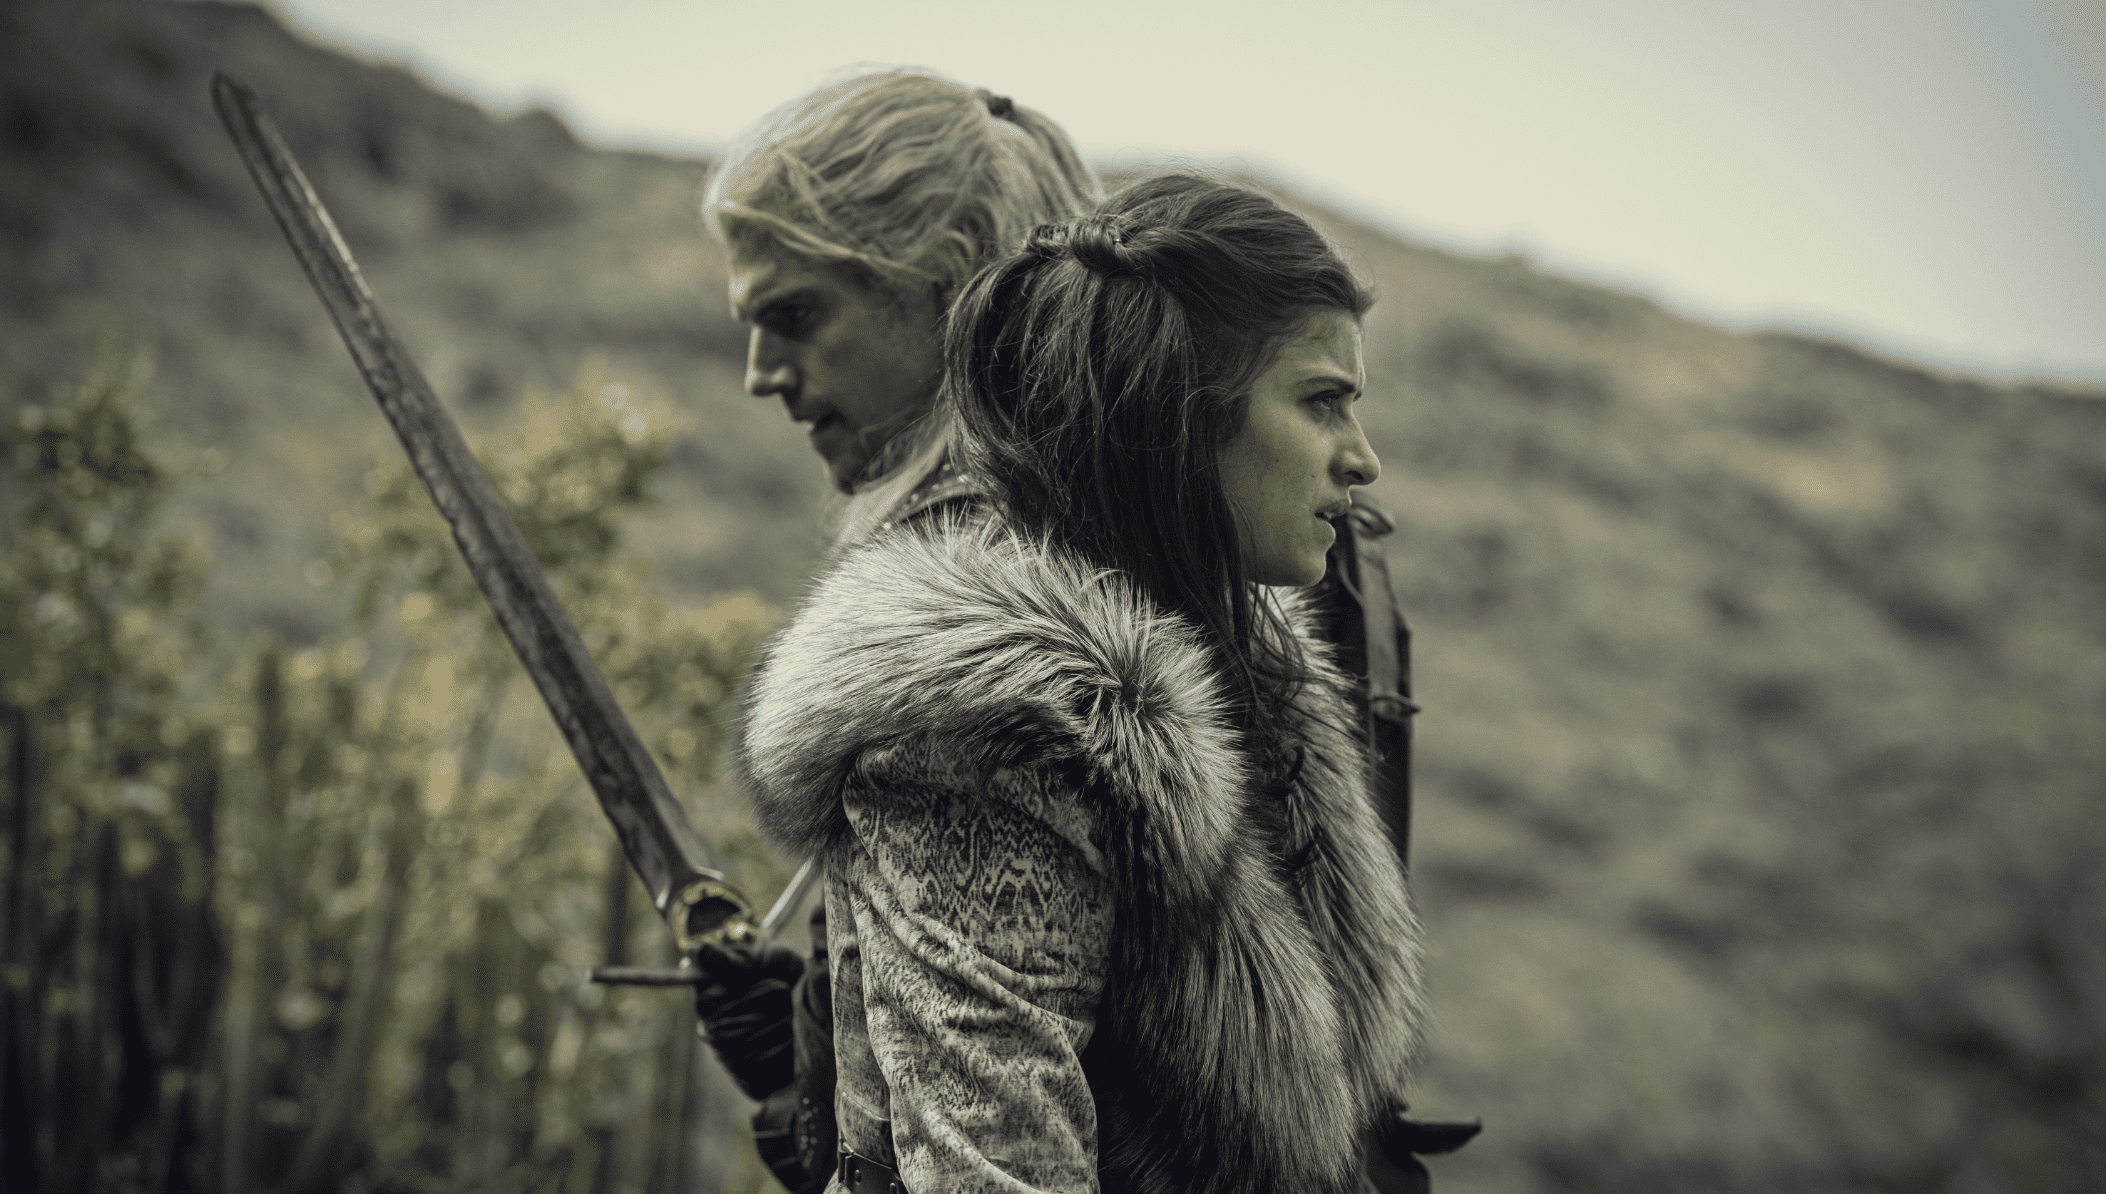 Two of the main characters in “The Witcher,” one holding a sword and the other wearing a fur collar